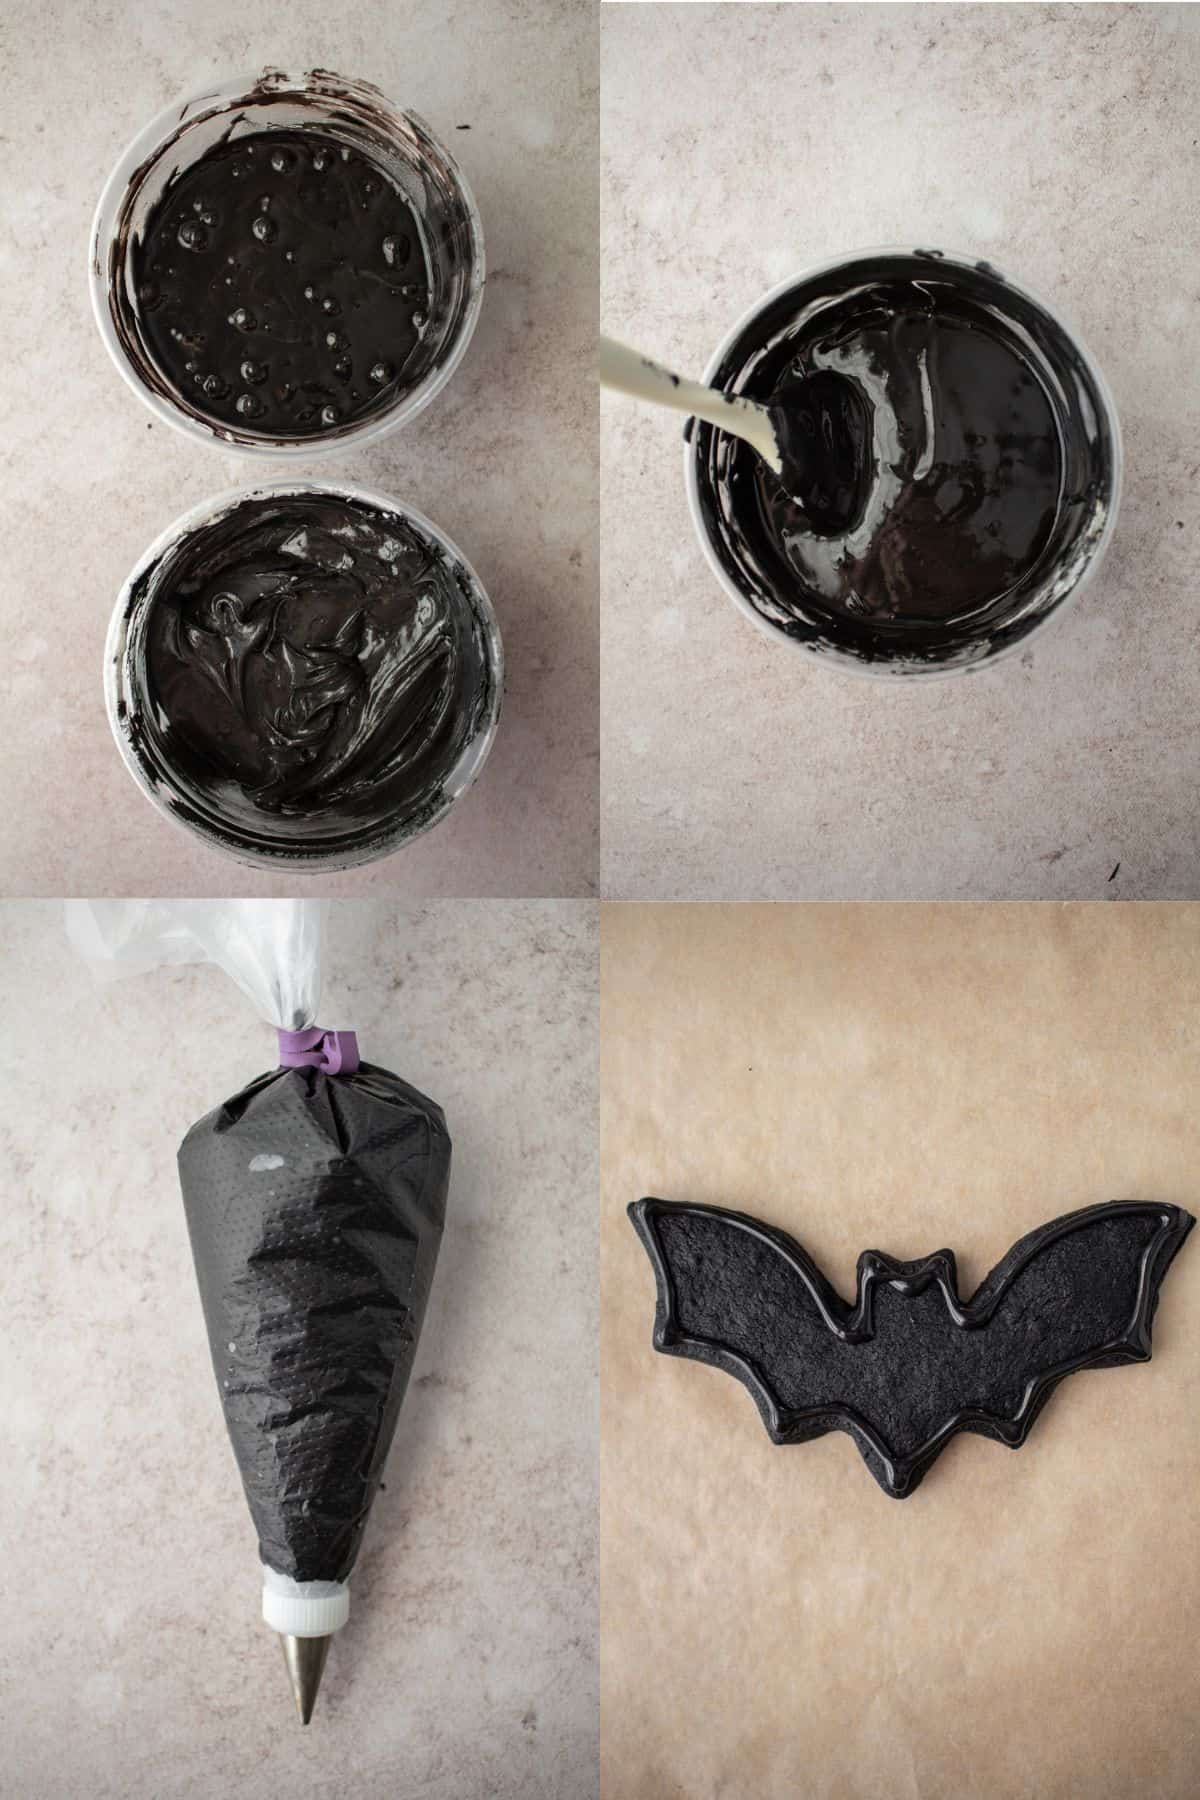 coloring black royal icing and achieving correct consistency, outlining bat cookies